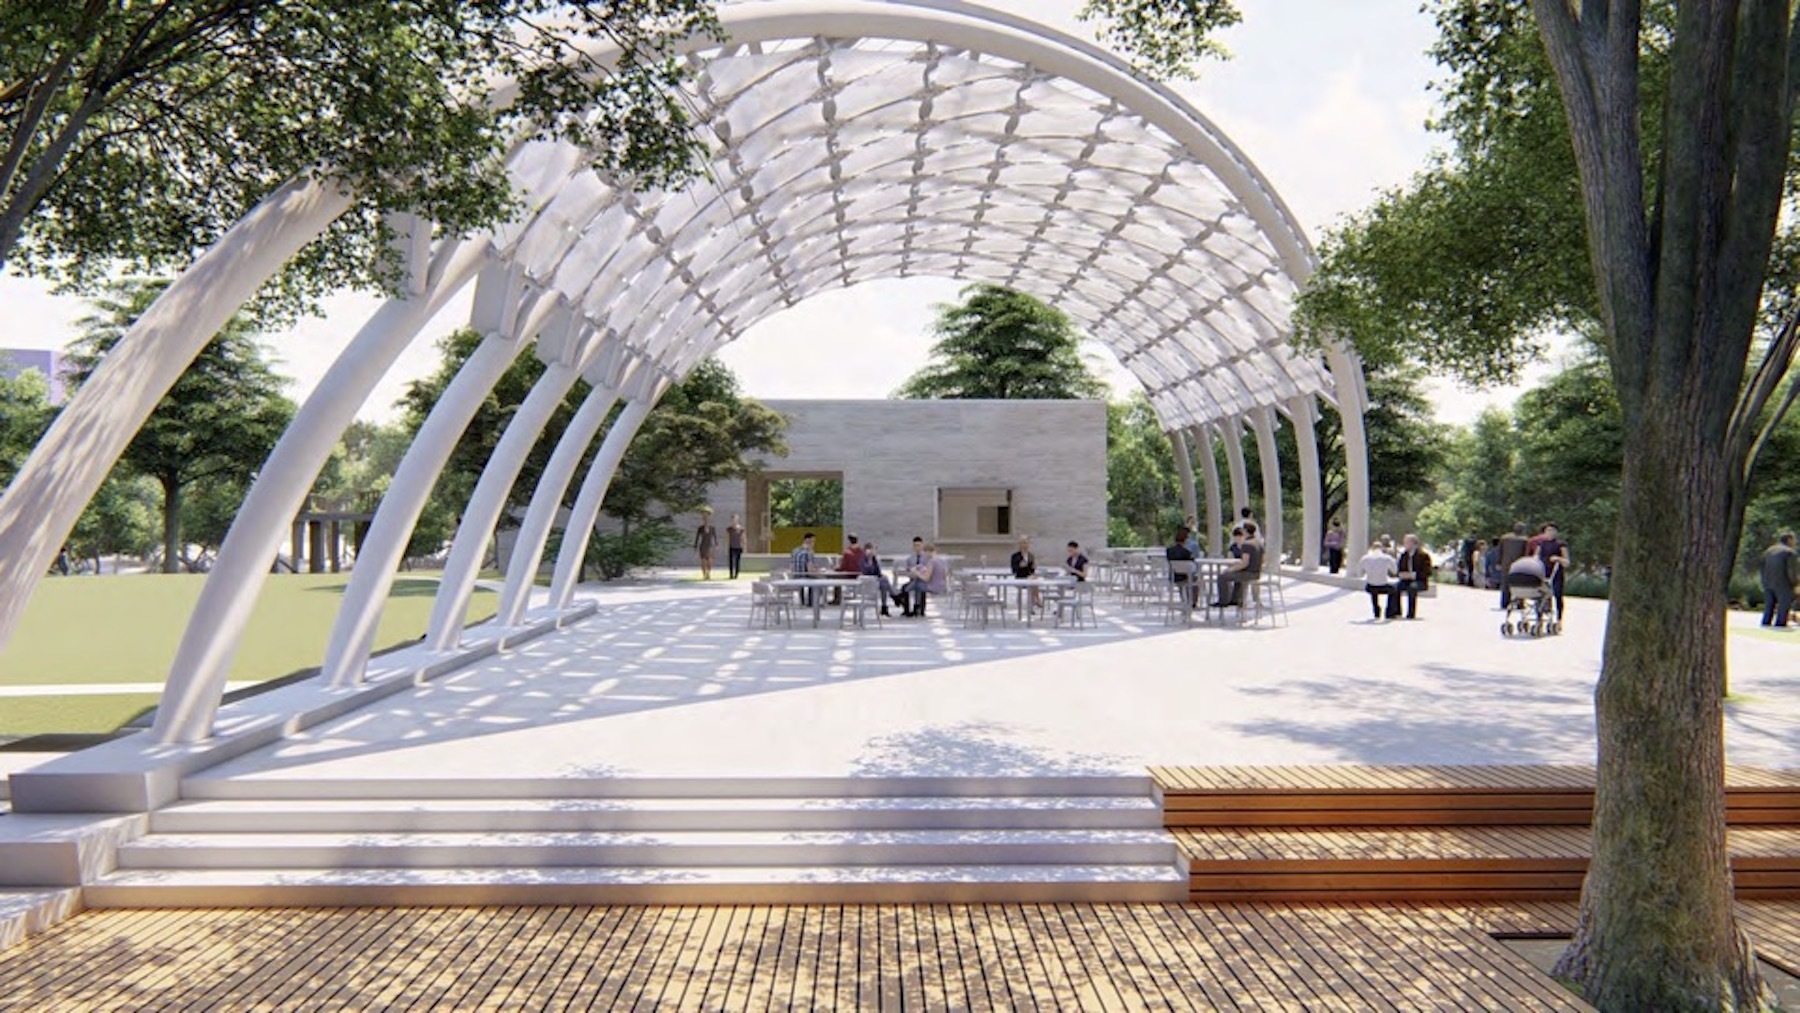 A rendering of a shade structure offering seating for dining is central to phase one of The Bay. (Courtesy Bay Park Conservancy)